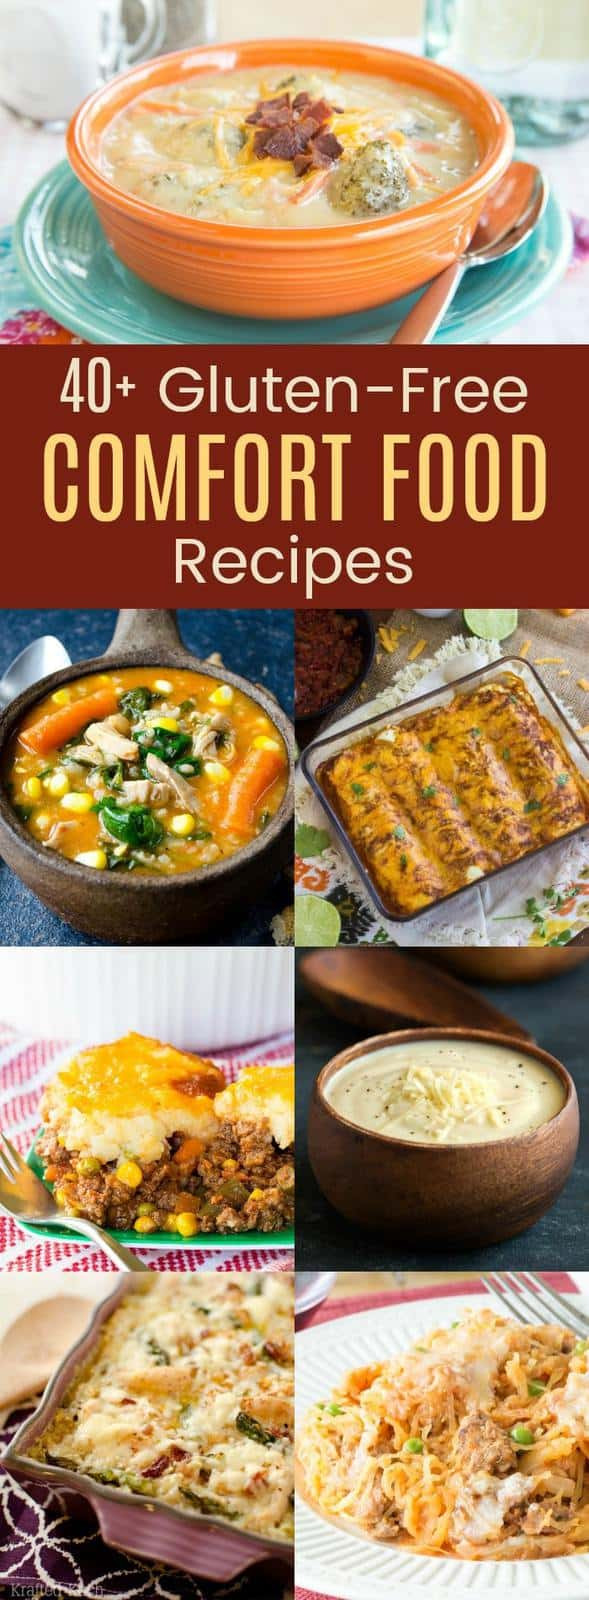 Gluten Free Food Recipes
 40 Gluten Free fort Food Recipes Cupcakes & Kale Chips